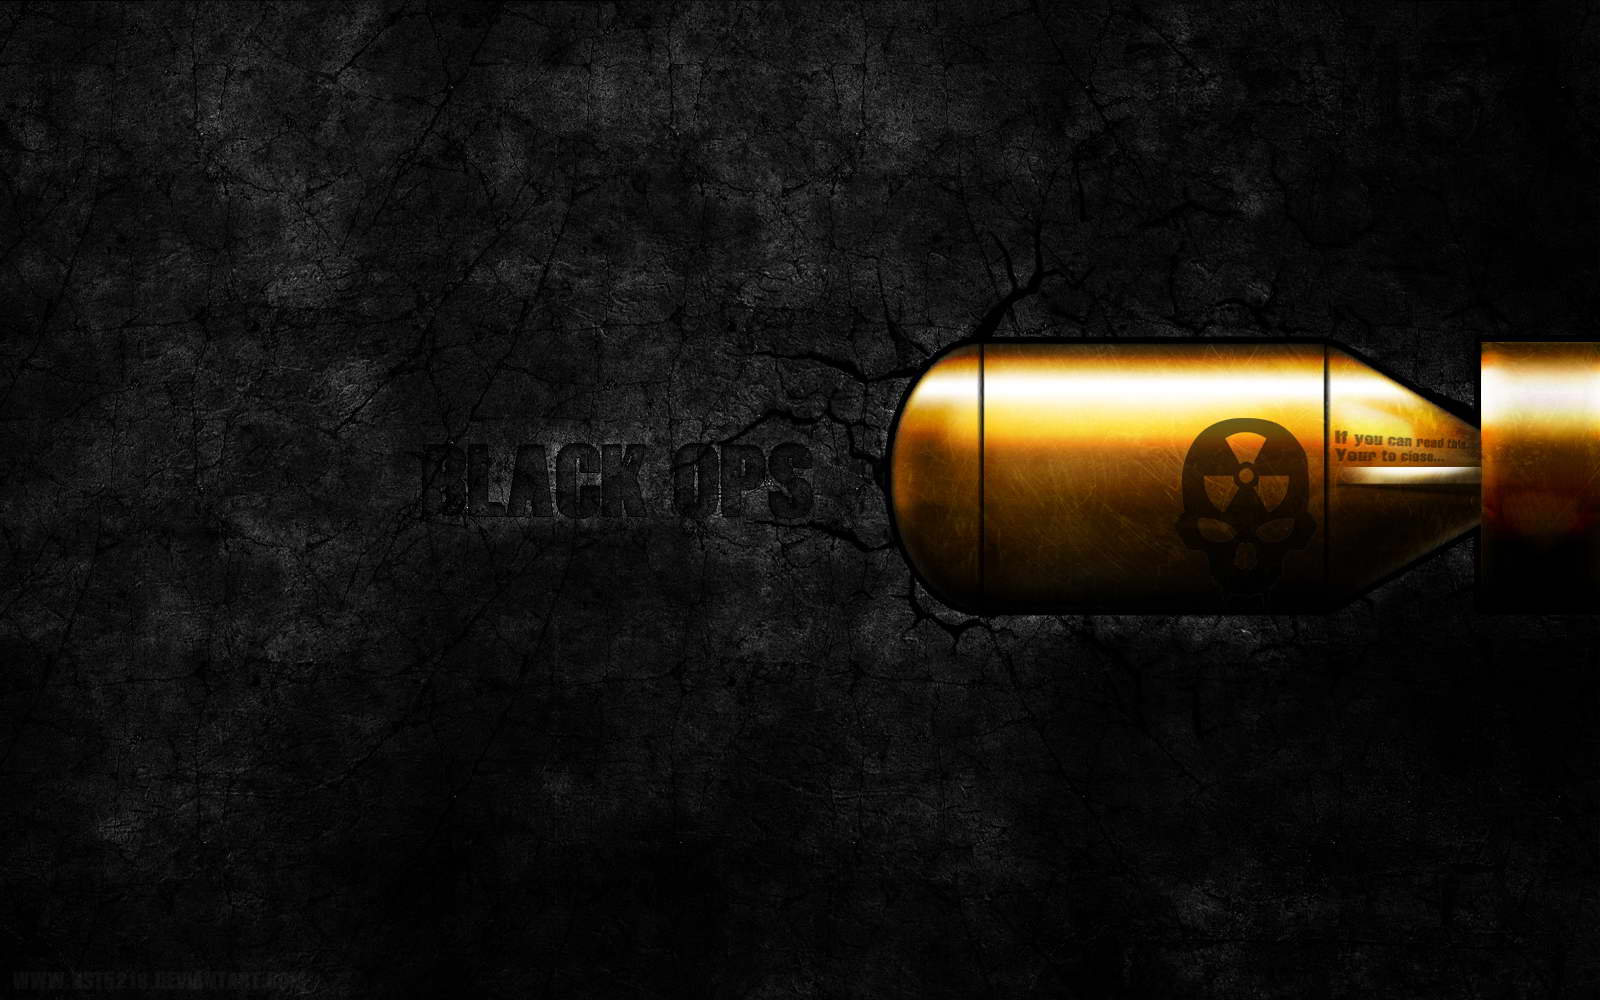 Call Of Duty Black Ops 2 Wallpaper 2605 1920x1080 px